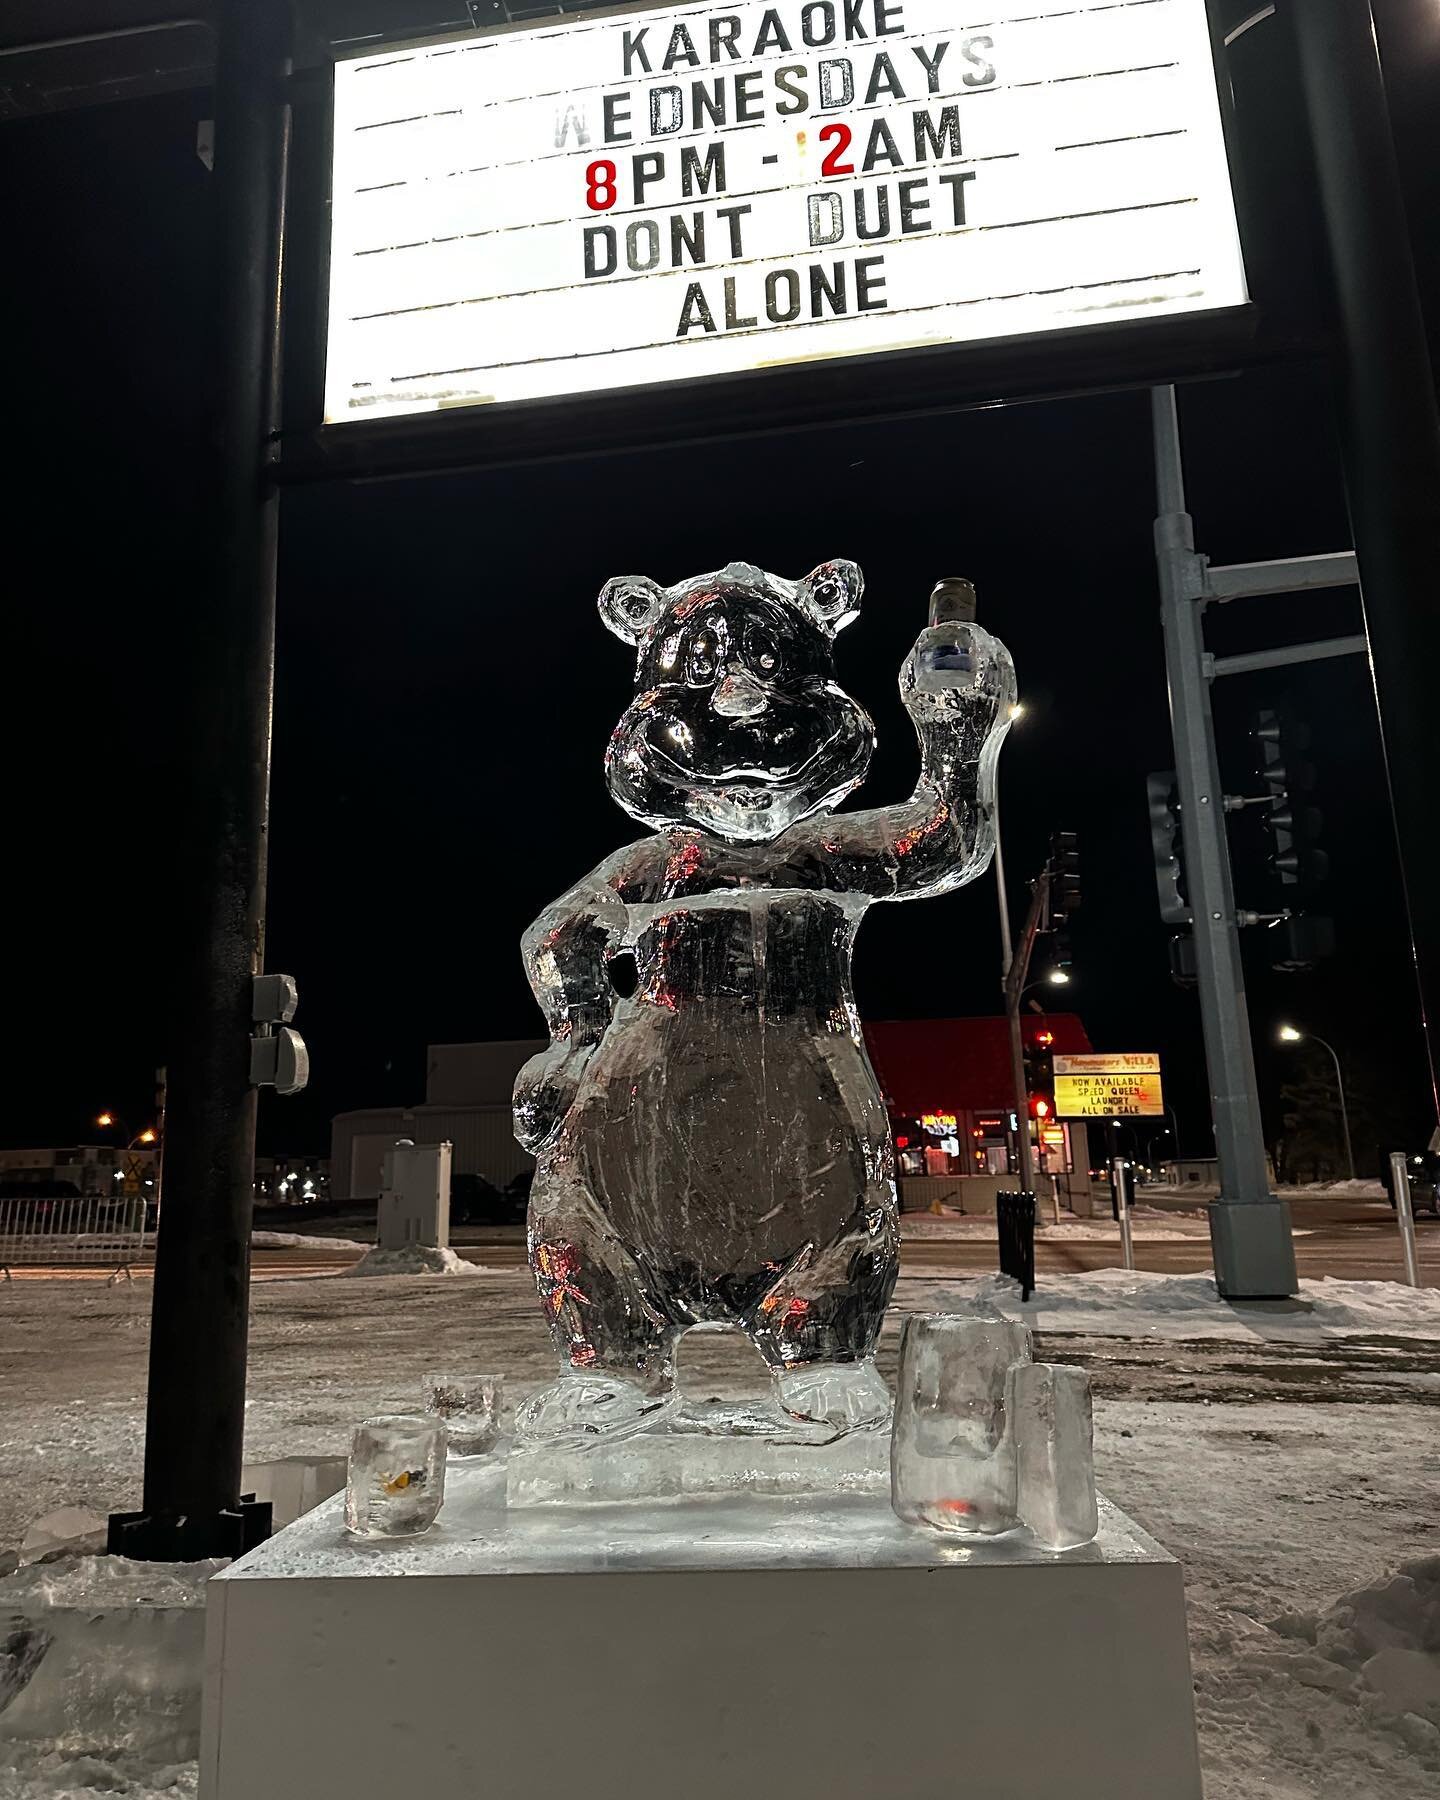 Before we headed down to Wisconsin we snuck in this live Hamm&rsquo;s bear (Sasha) carving and shot luge over @haroldsonmain #icecarving #hammsbeer #hammsbear #shotluge